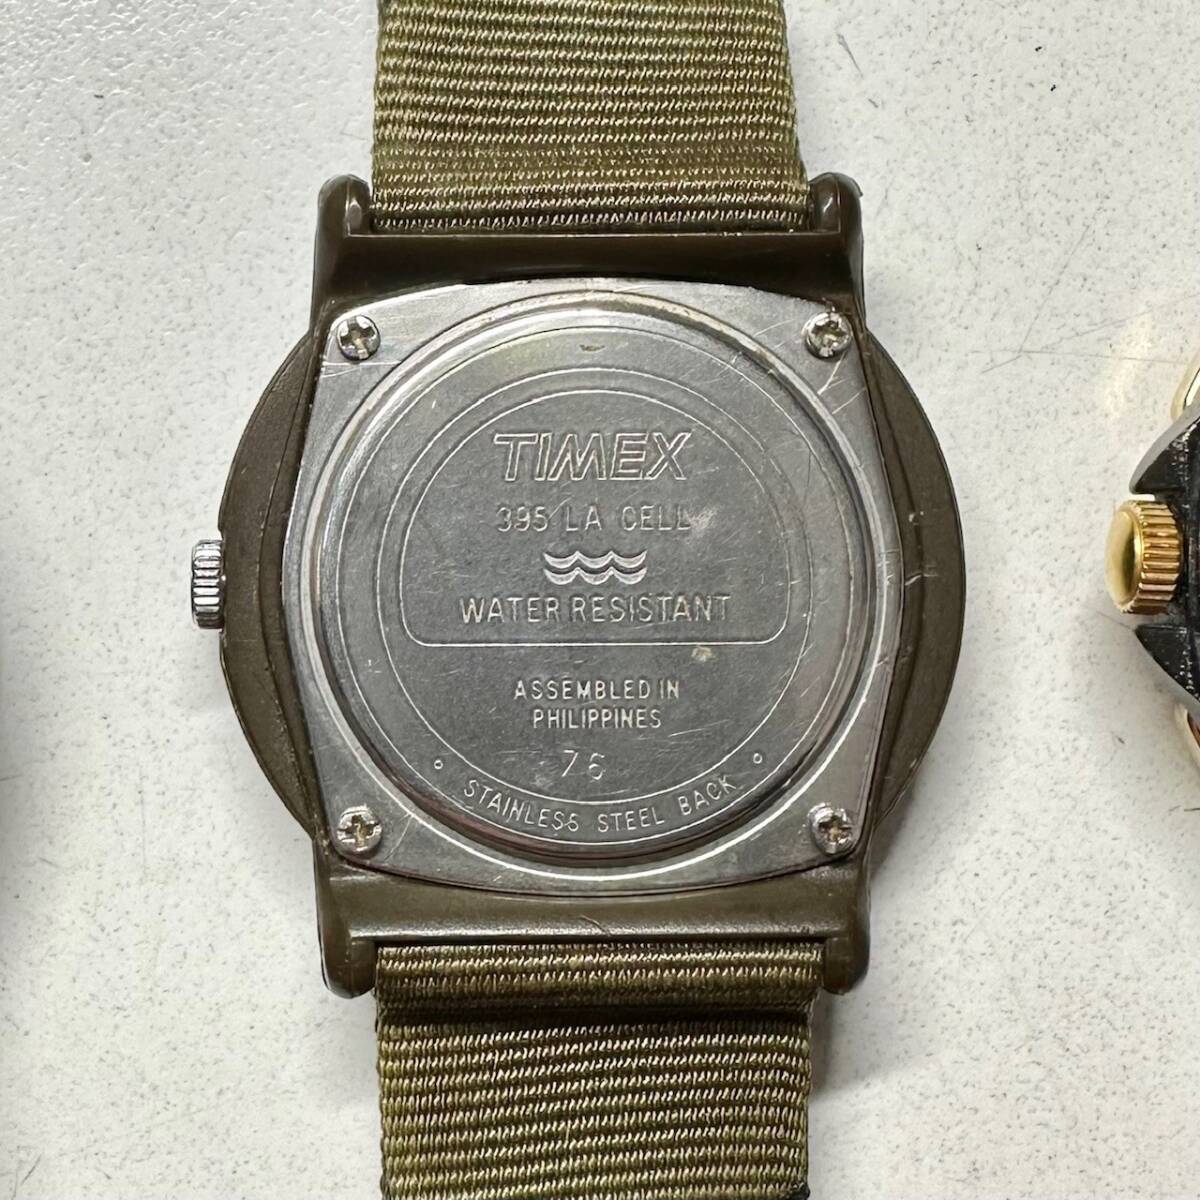 【TIMEX 腕時計まとめて4本】タイメックス INDIGLO WR30/EXPEDITION WR50M/395LA CELL/376MA CELL_画像9